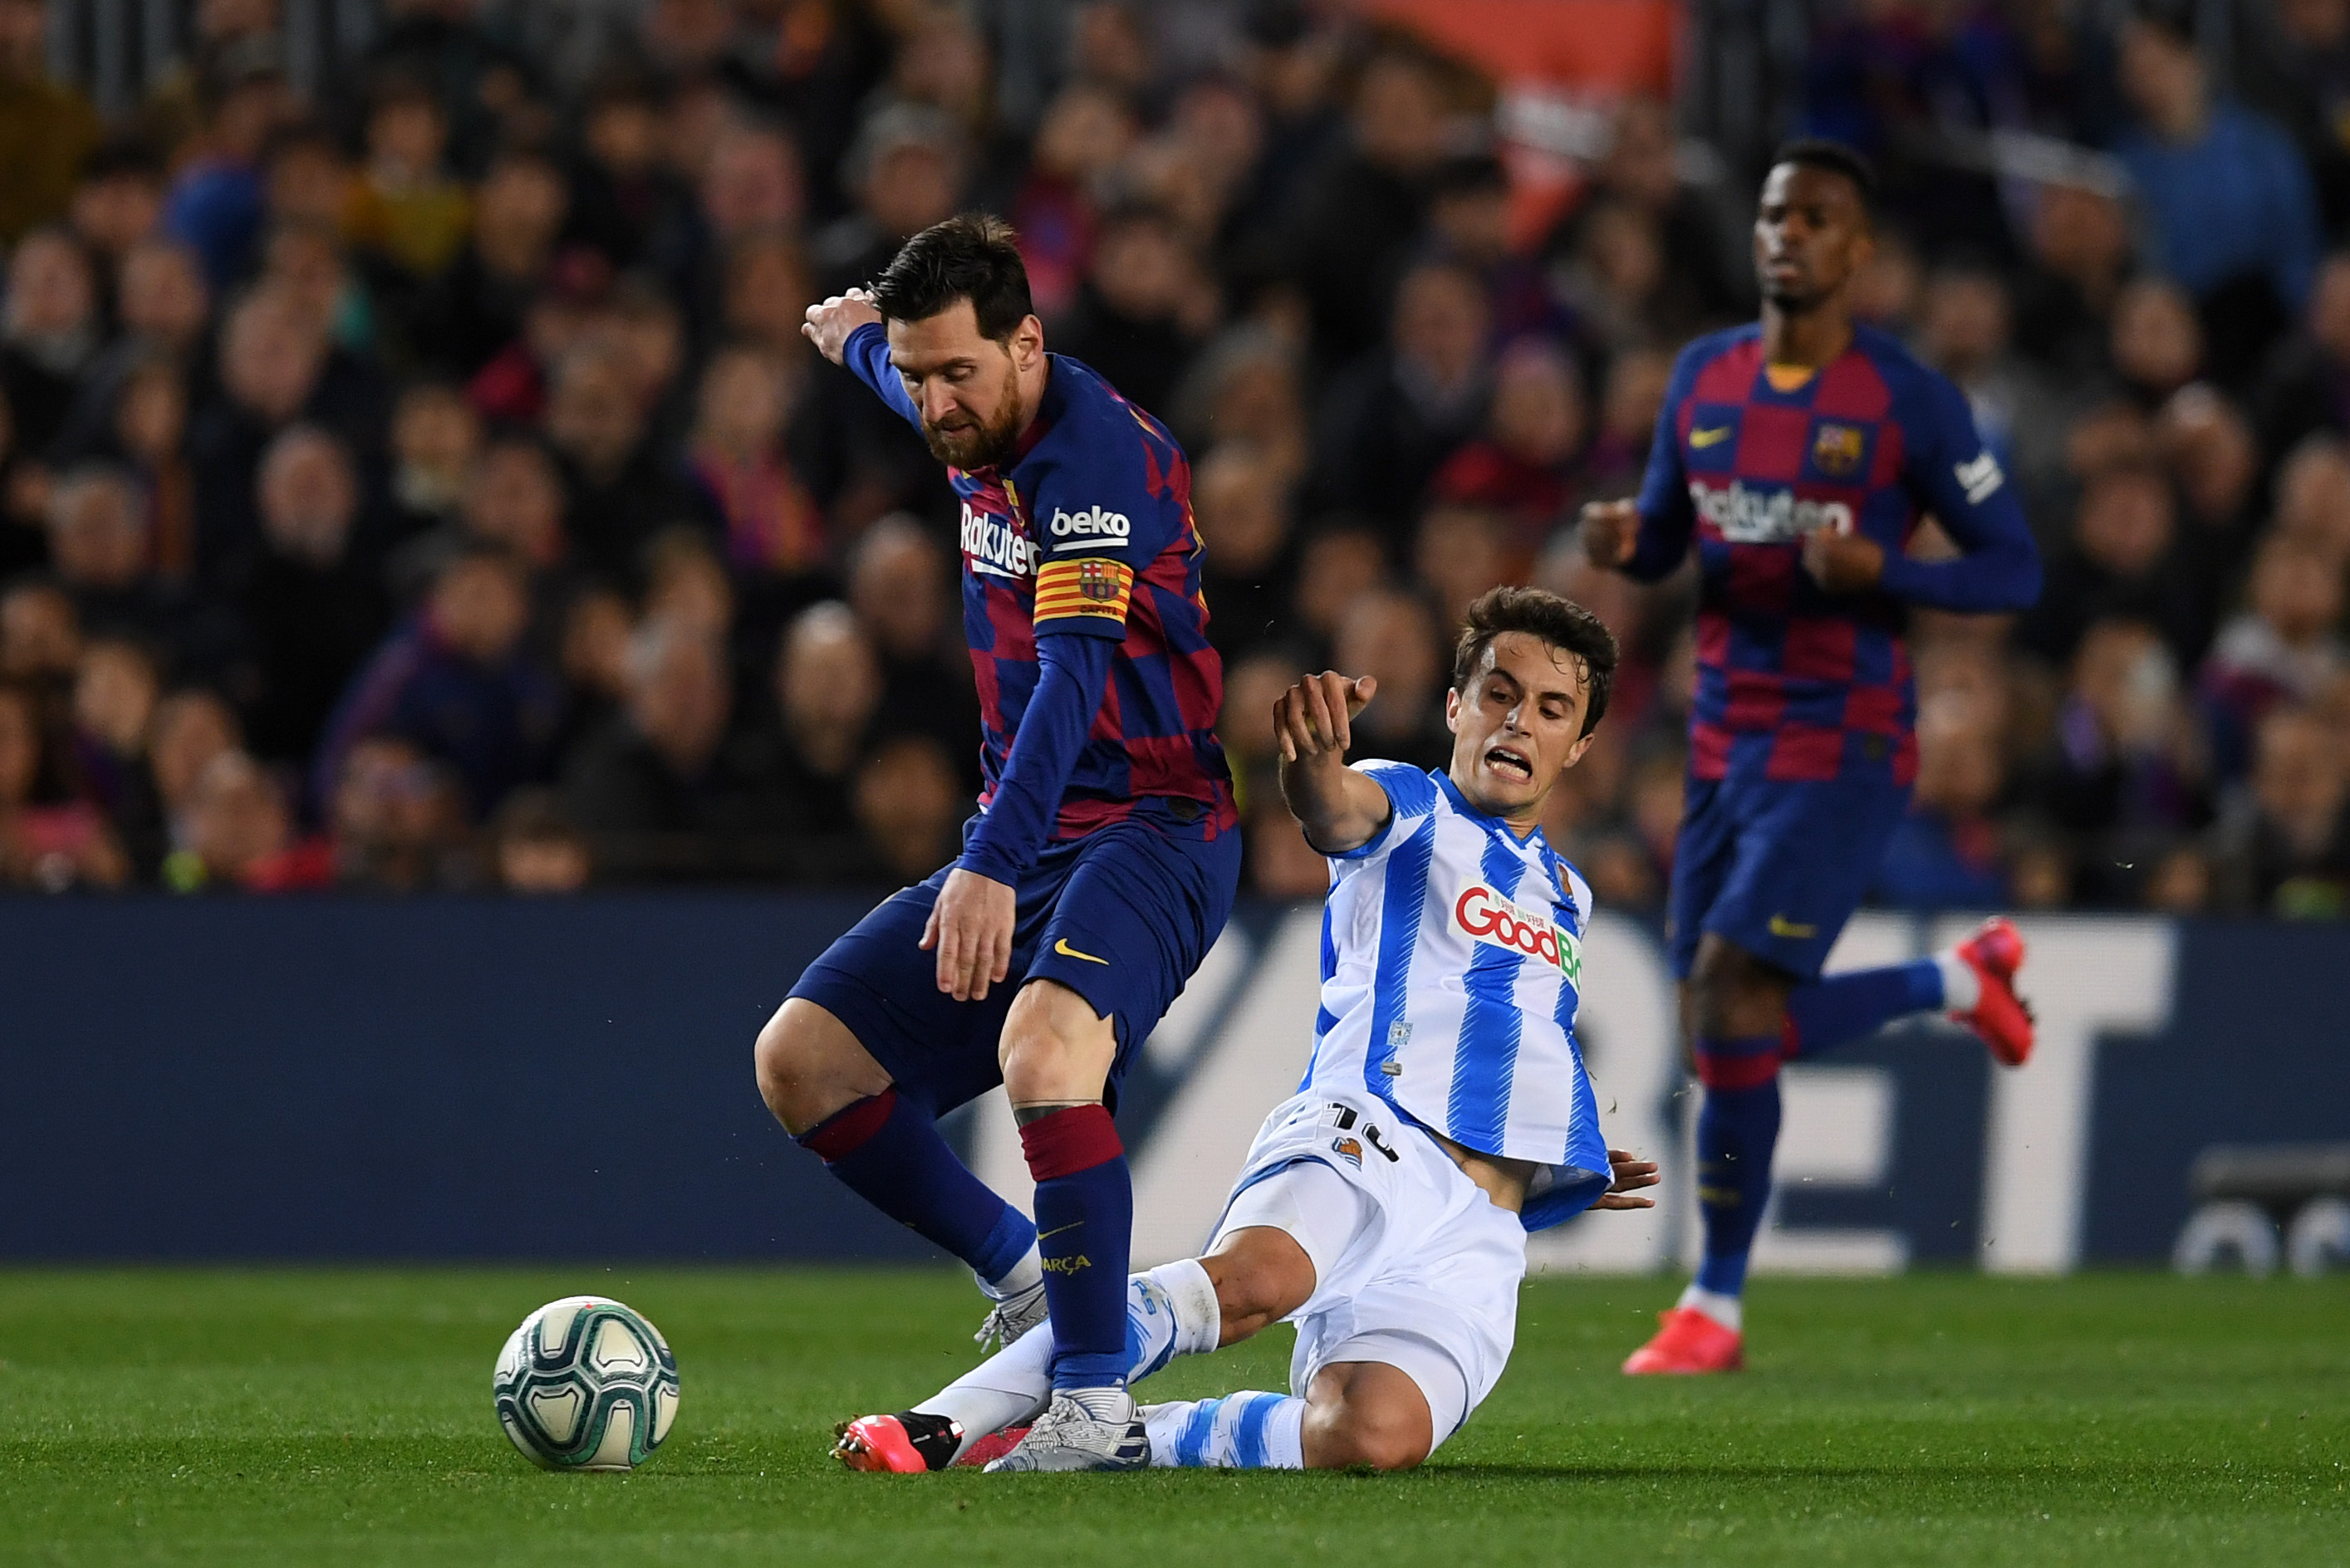 Lionel Messi absent as Barcelona prepare to take on Real Sociedad